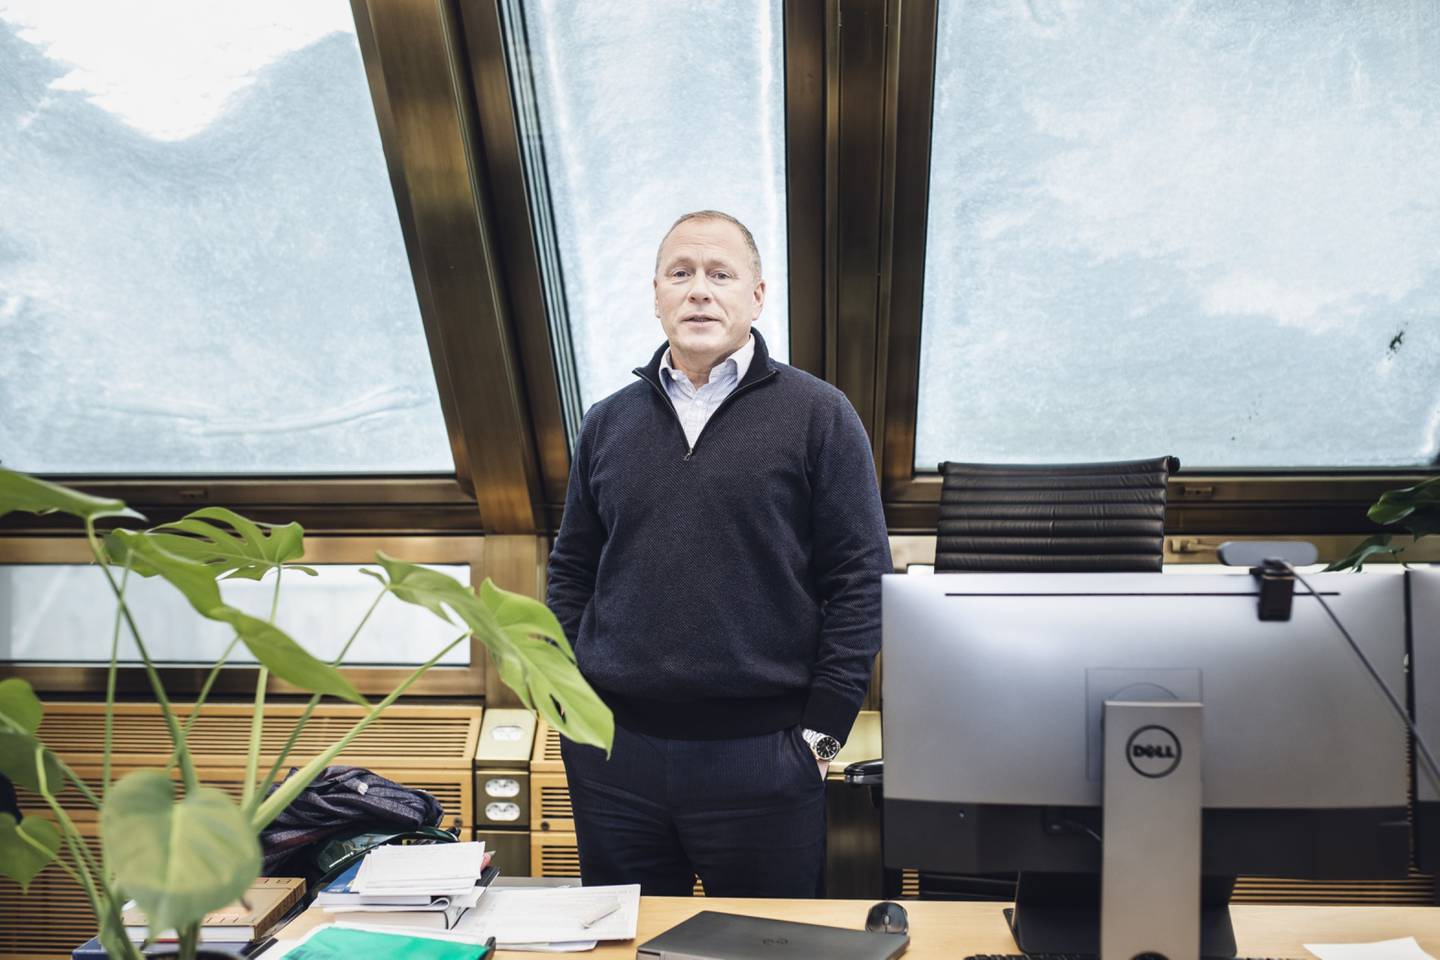 Nicolai Tangen, chief executive officer of Norges Bank Investment Management, during an interview at their offices in Oslo, Norway, on Wednesday, Dec. 1, 2021.